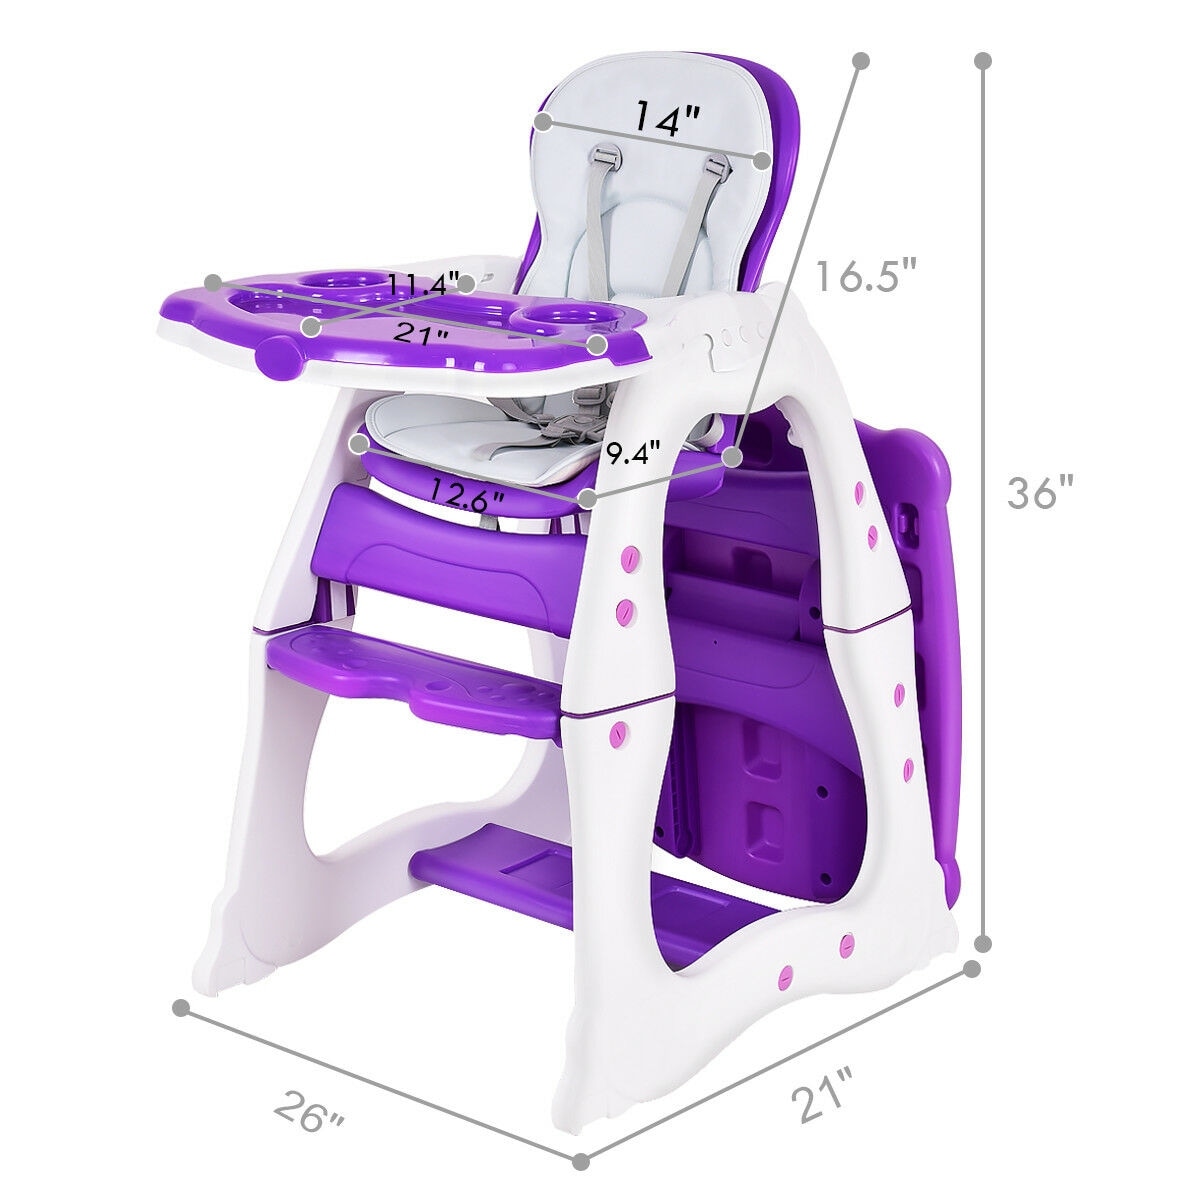 Costway 3 in 1 Baby High Chair Convertible Play Table Seat Booster - See details